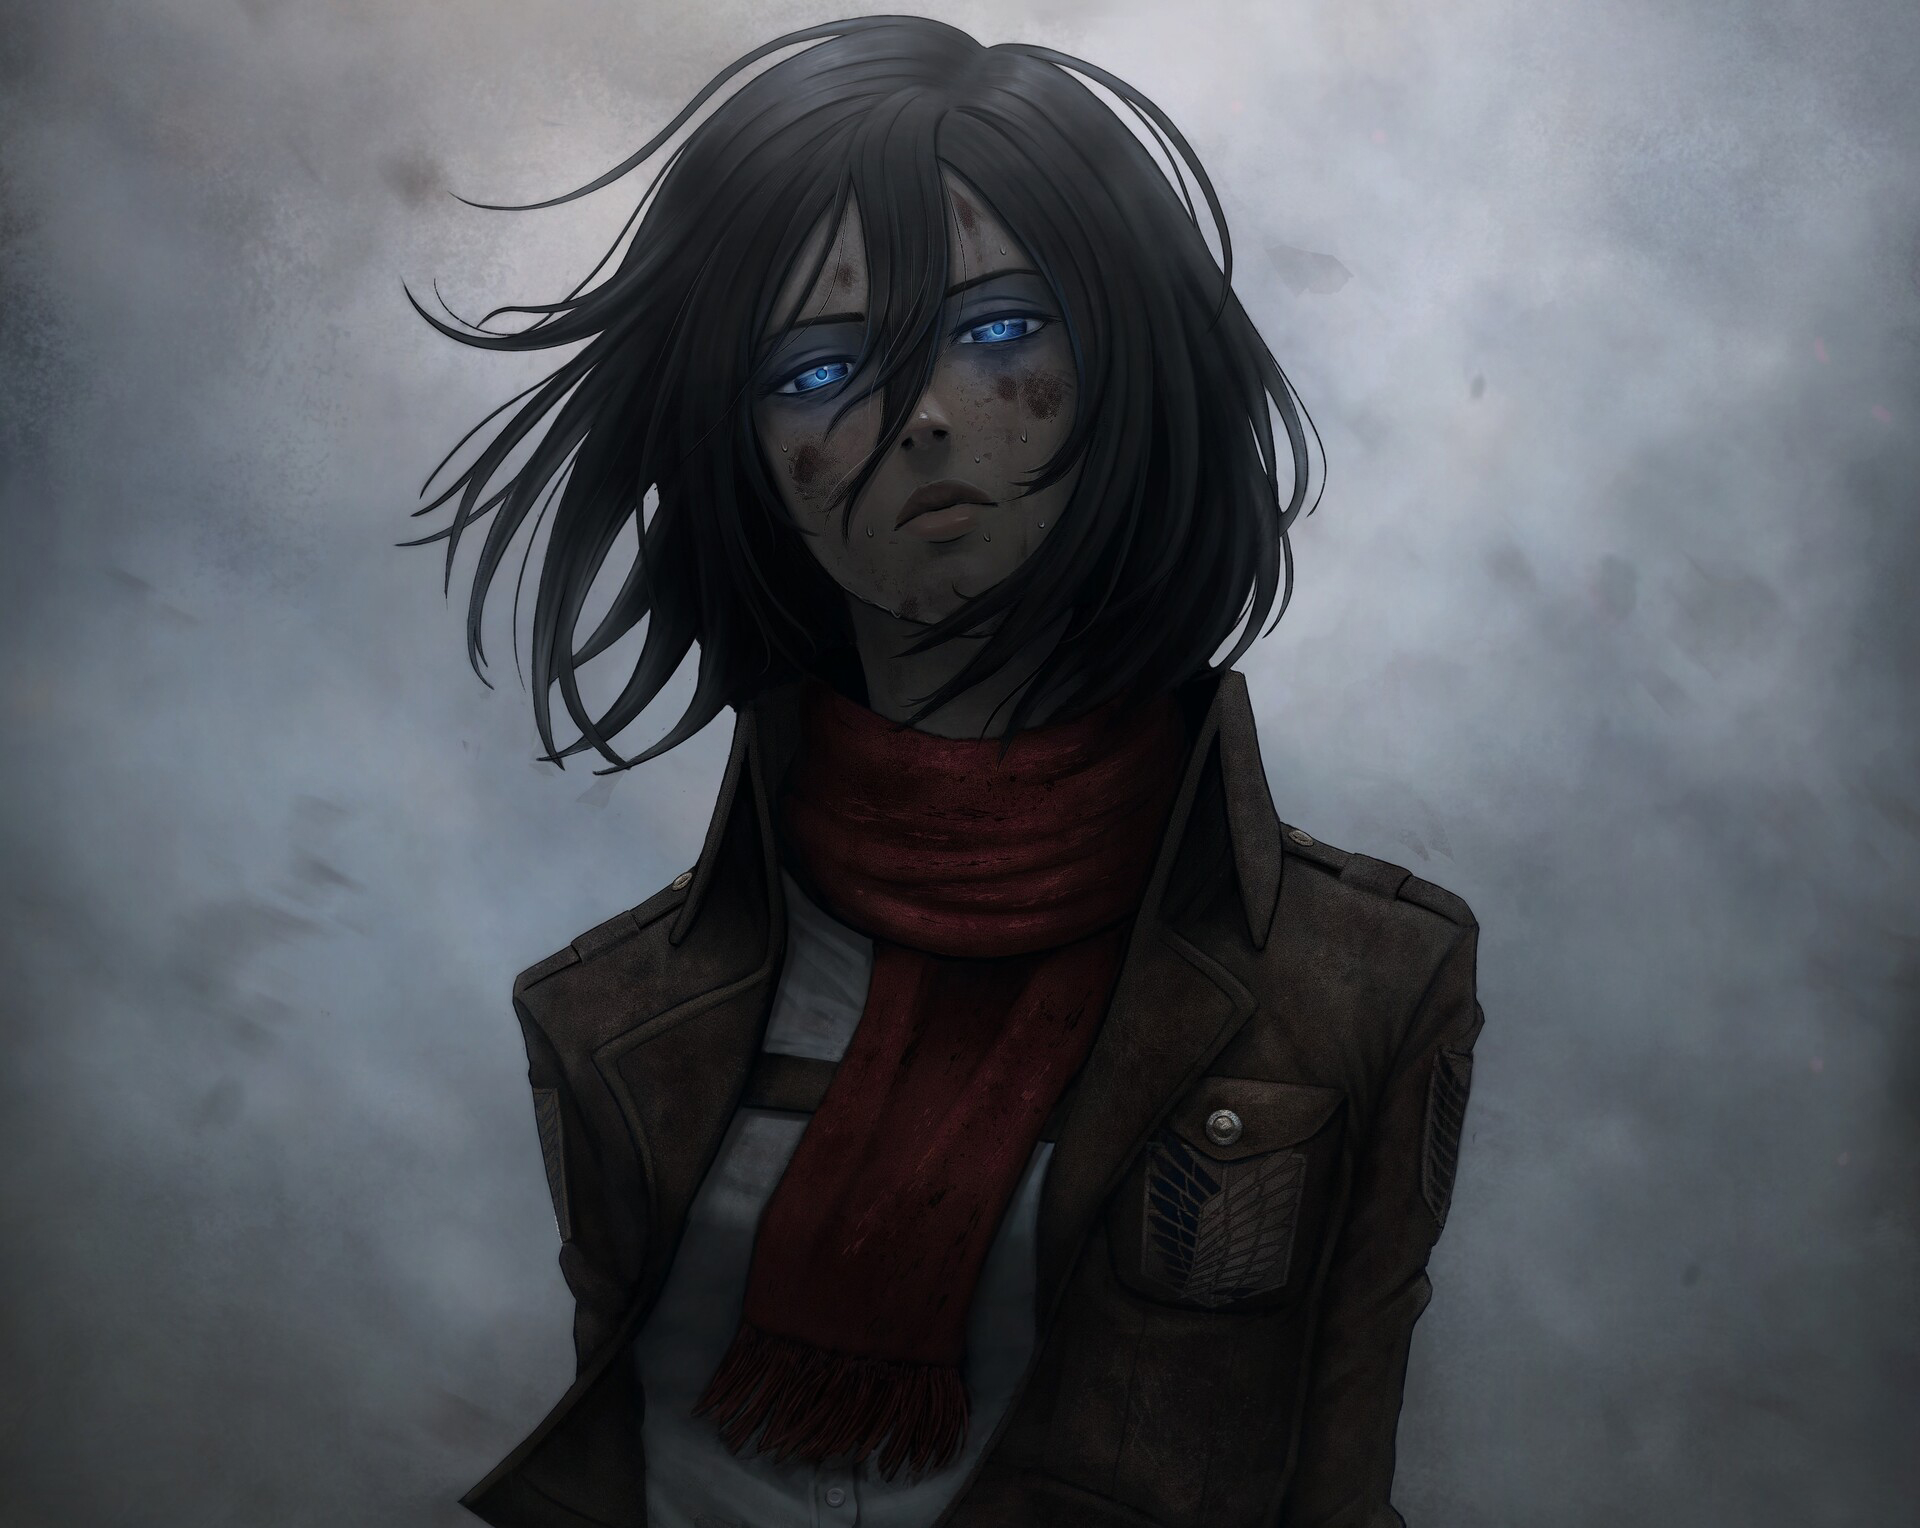 1242x26 Mikasa Ackerman Iphone Xs Max Wallpaper Hd Anime 4k Wallpapers Images Photos And Background Wallpapers Den